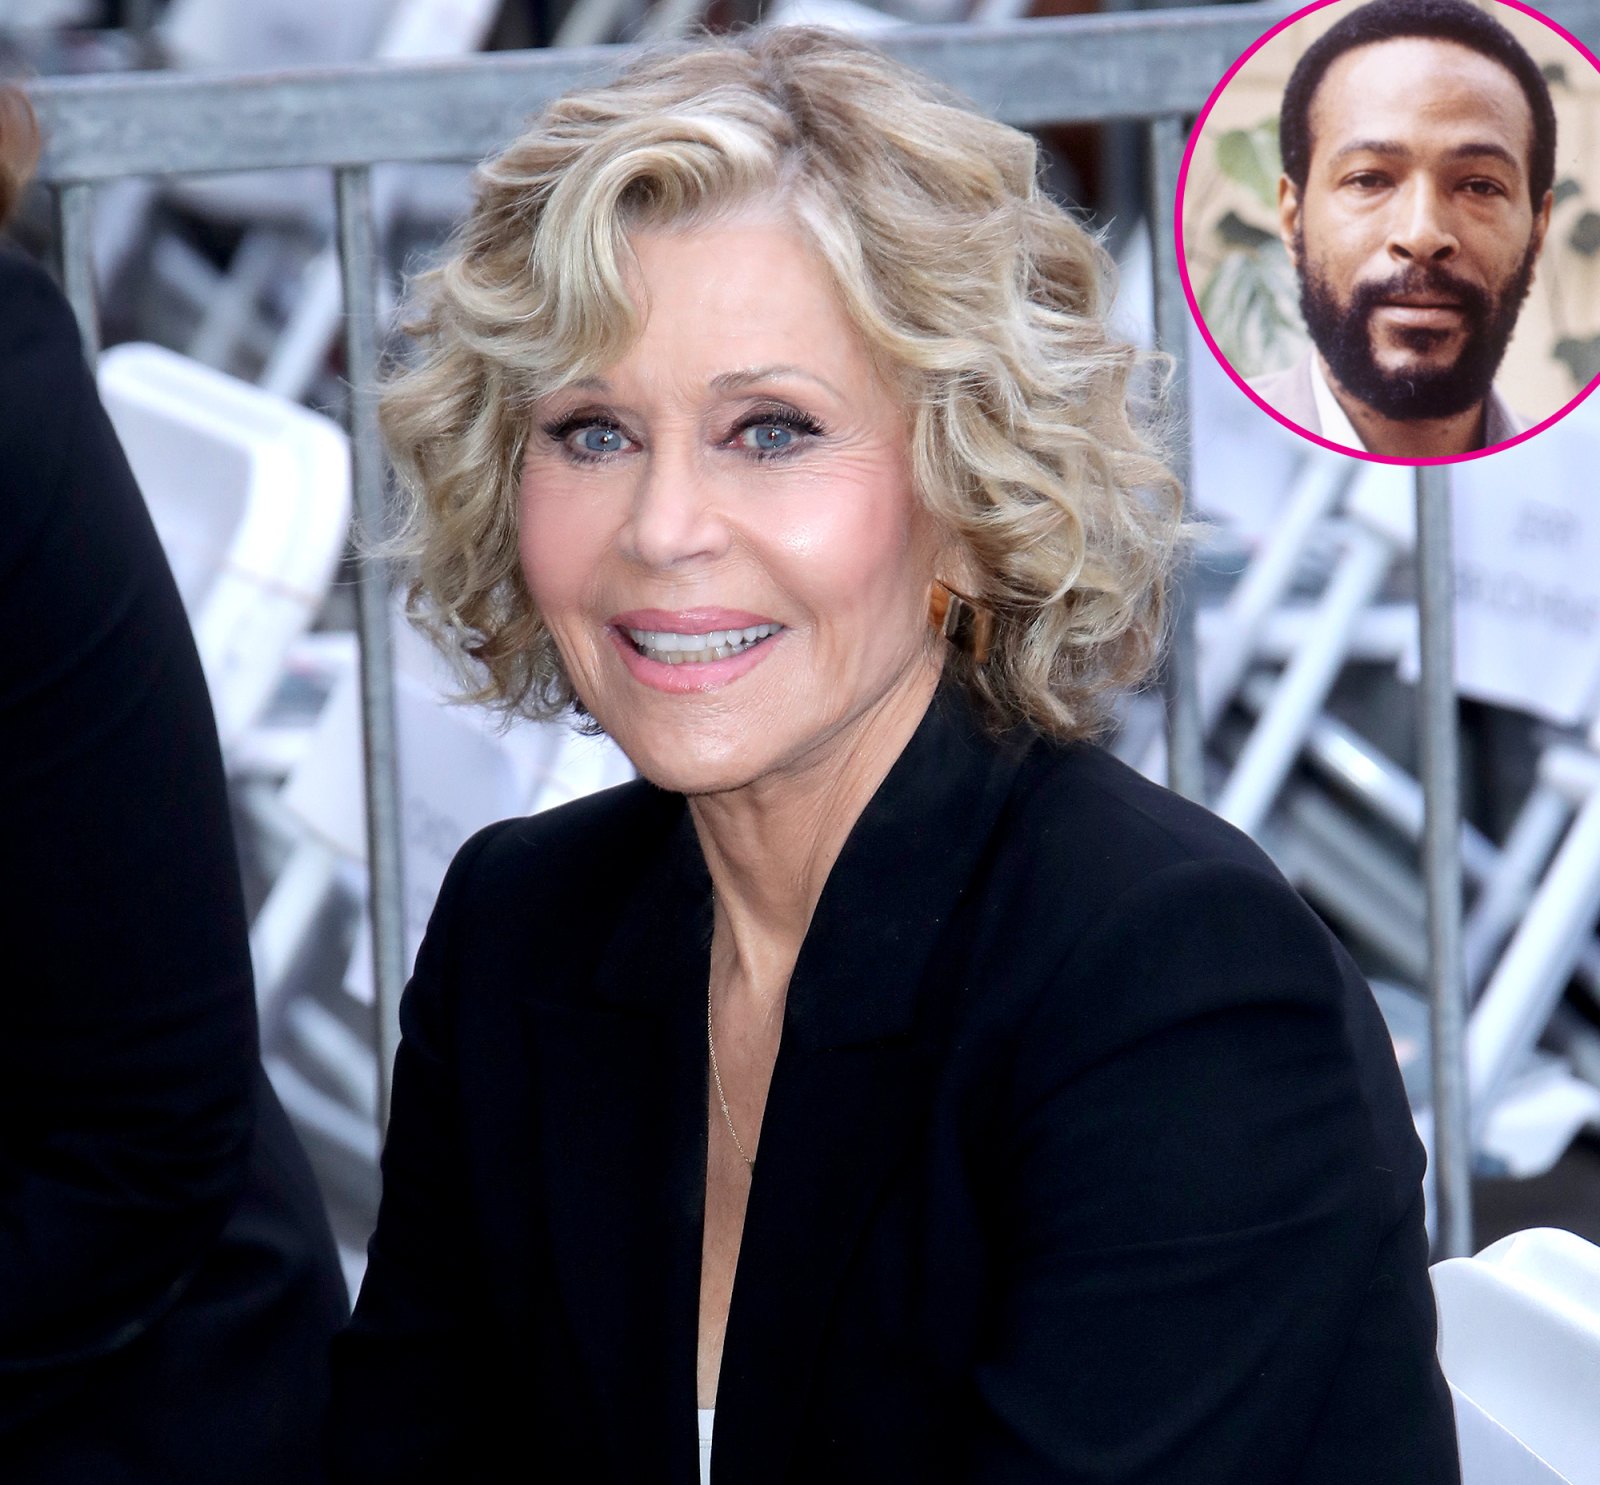 Jane Fonda Says She Regrets Not Sleeping With This Musician Marvin Gaye